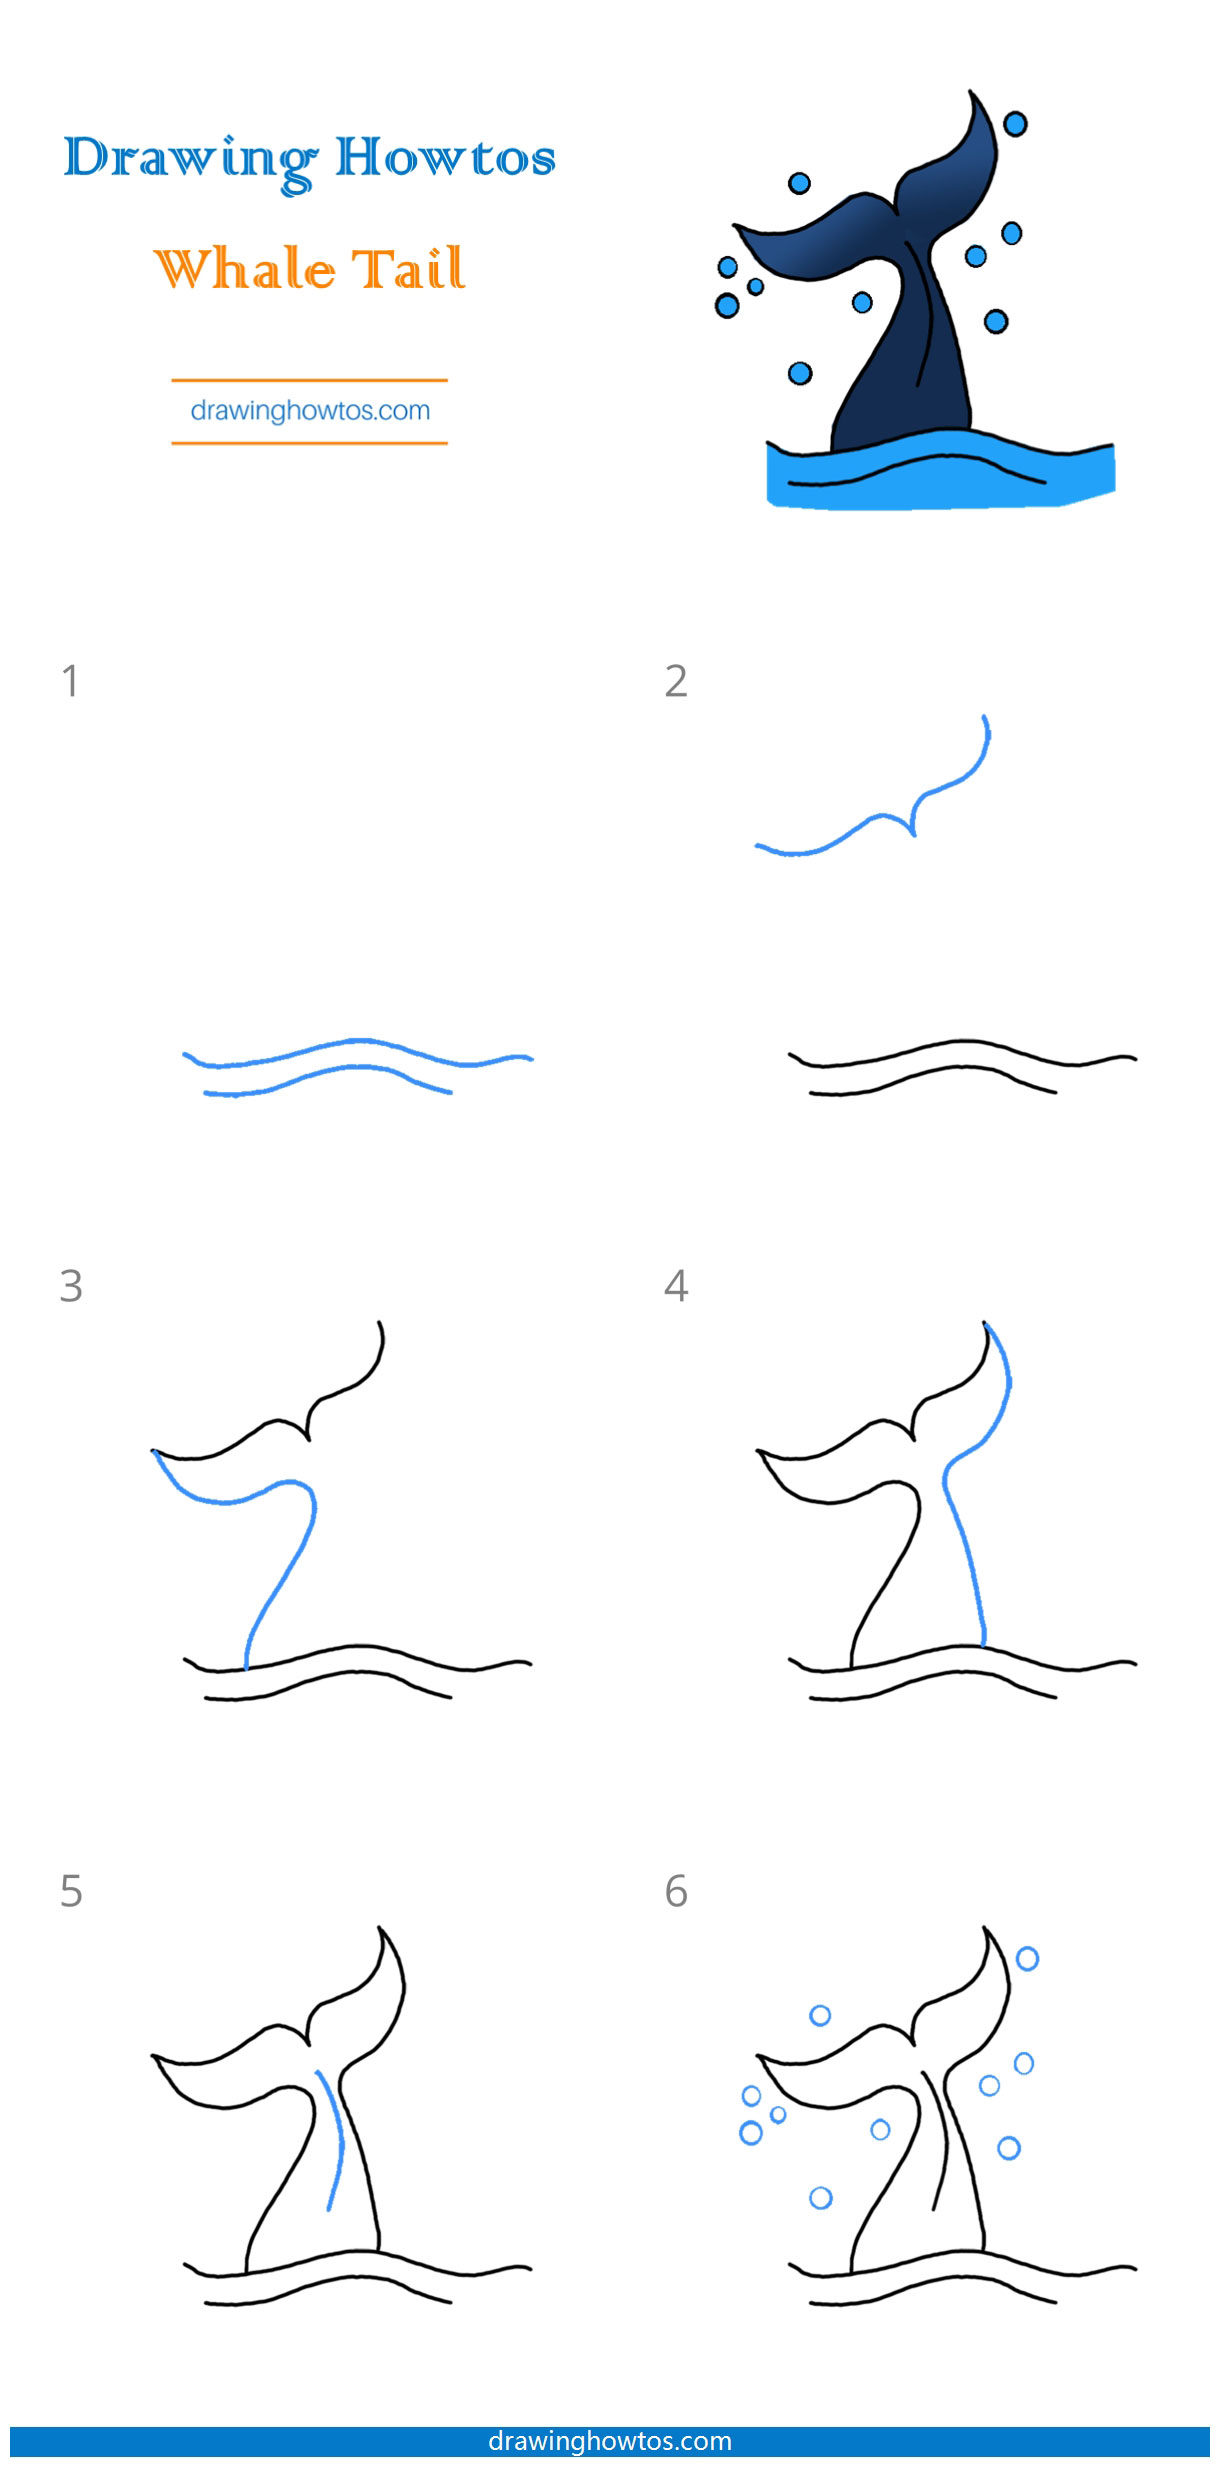 How to Draw a Whale Tail Step by Step